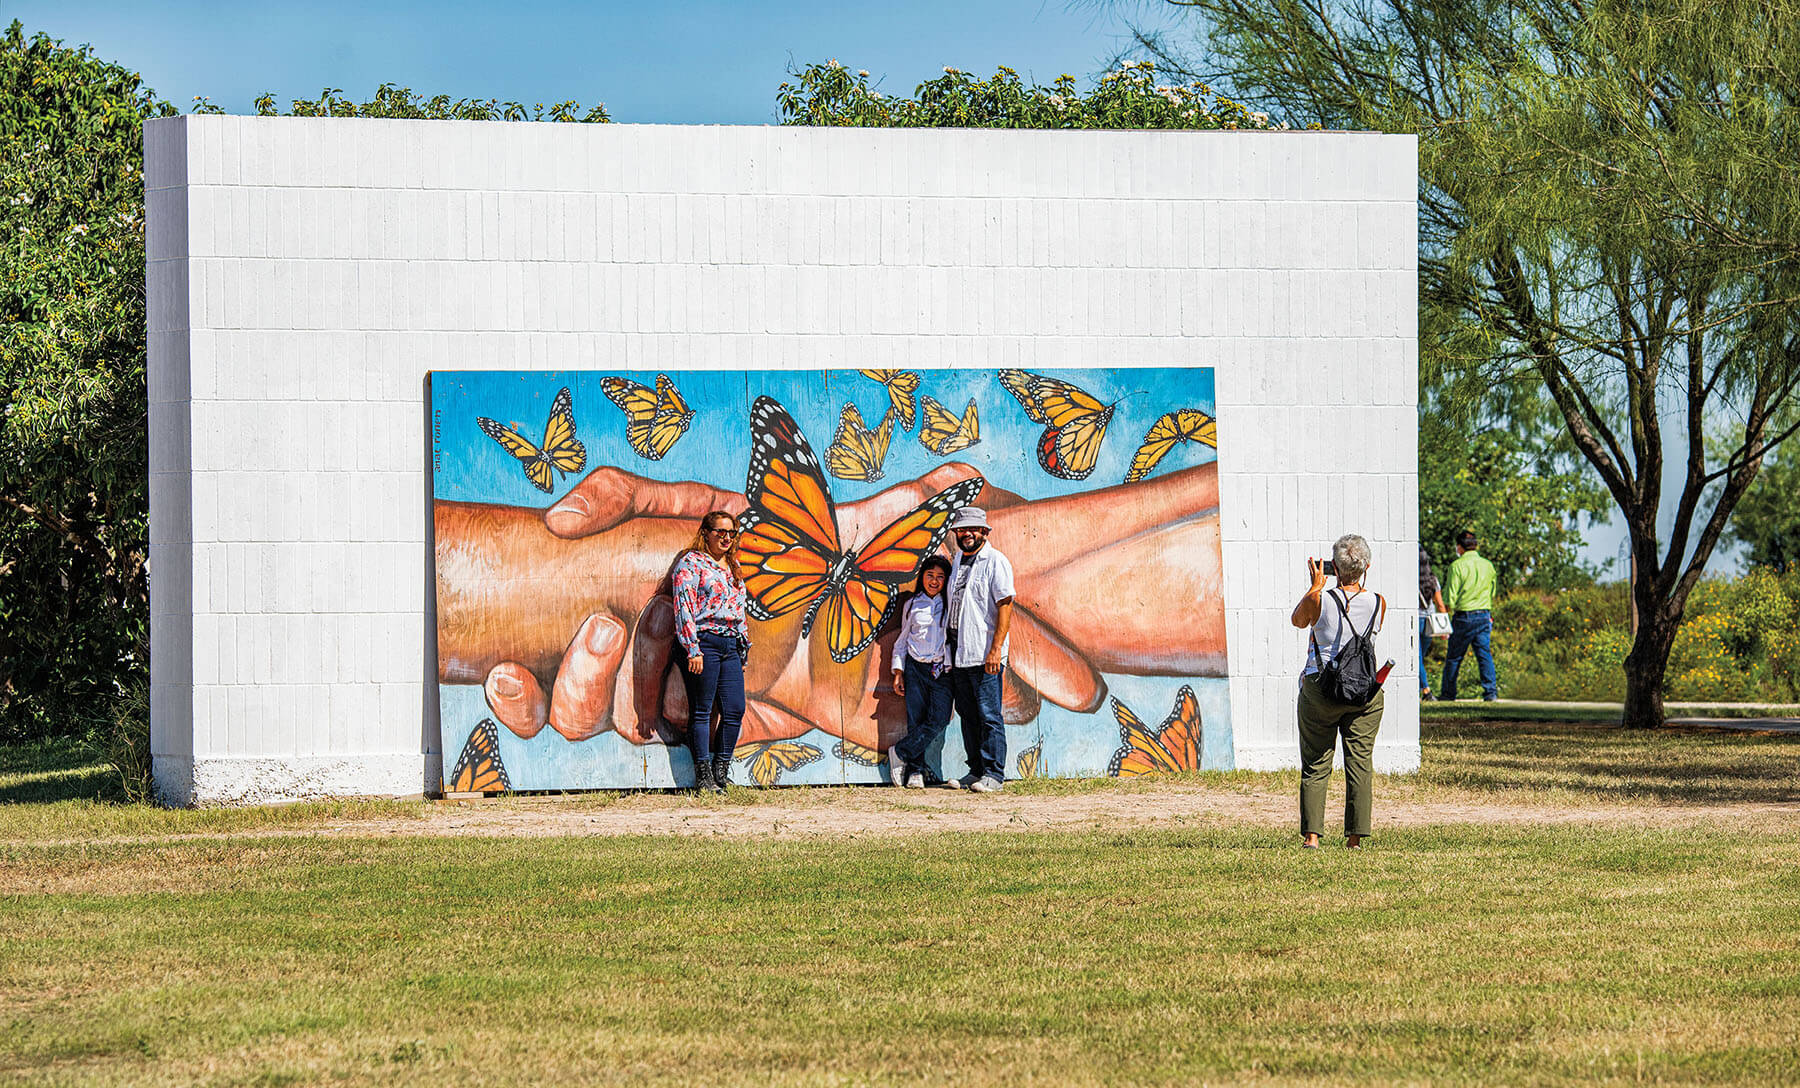 A group of people take pictures in front of a large butterfly mural